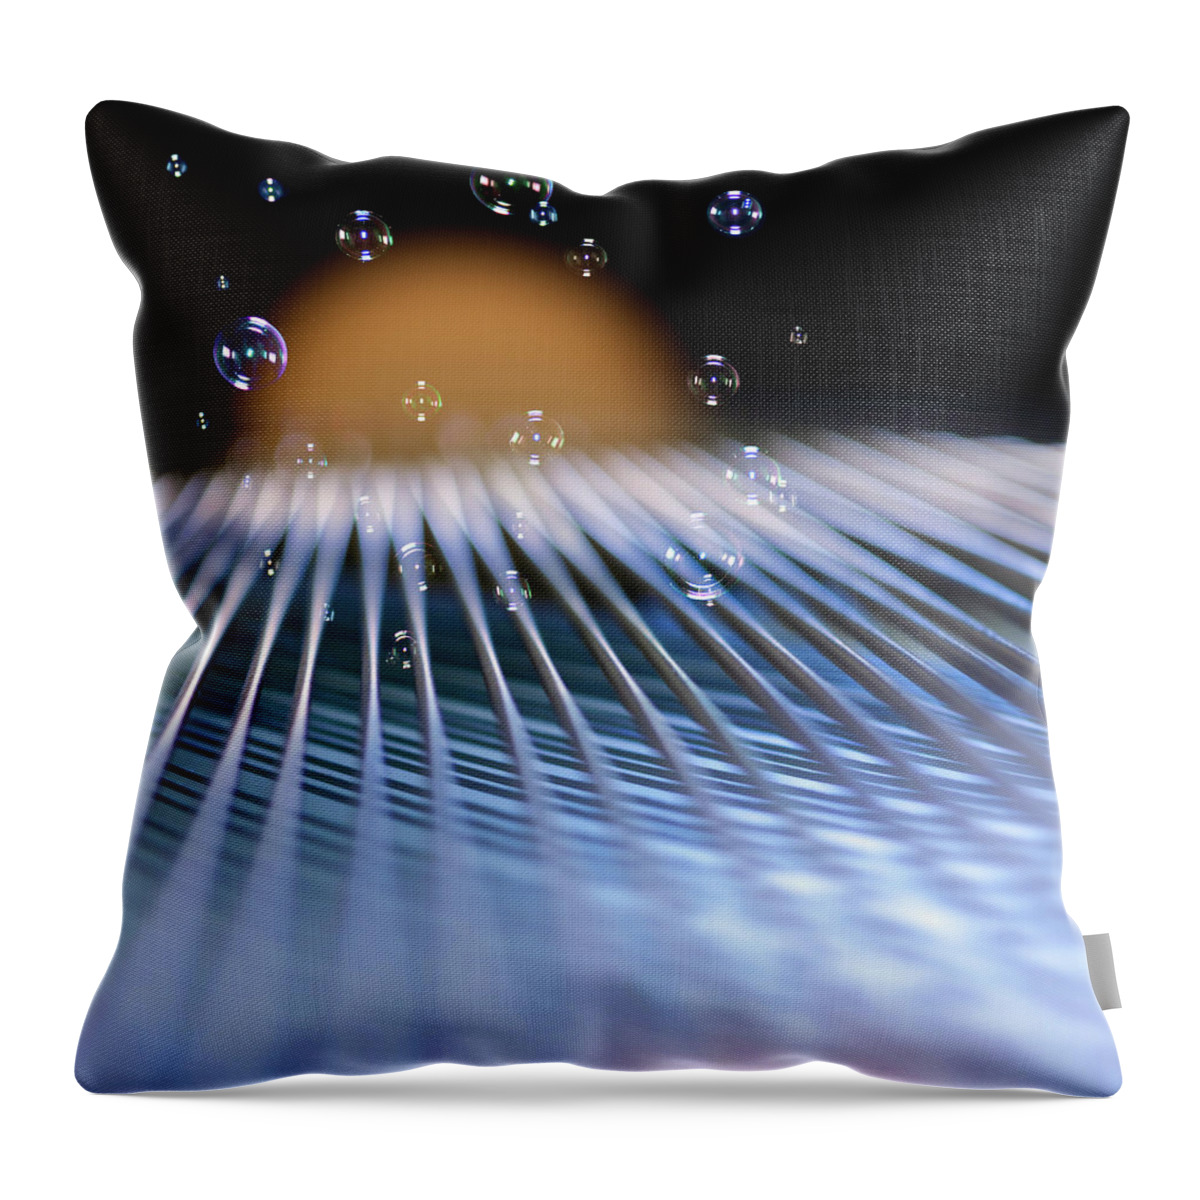 Music Throw Pillow featuring the photograph Piano Music by Photo By Marianna Armata